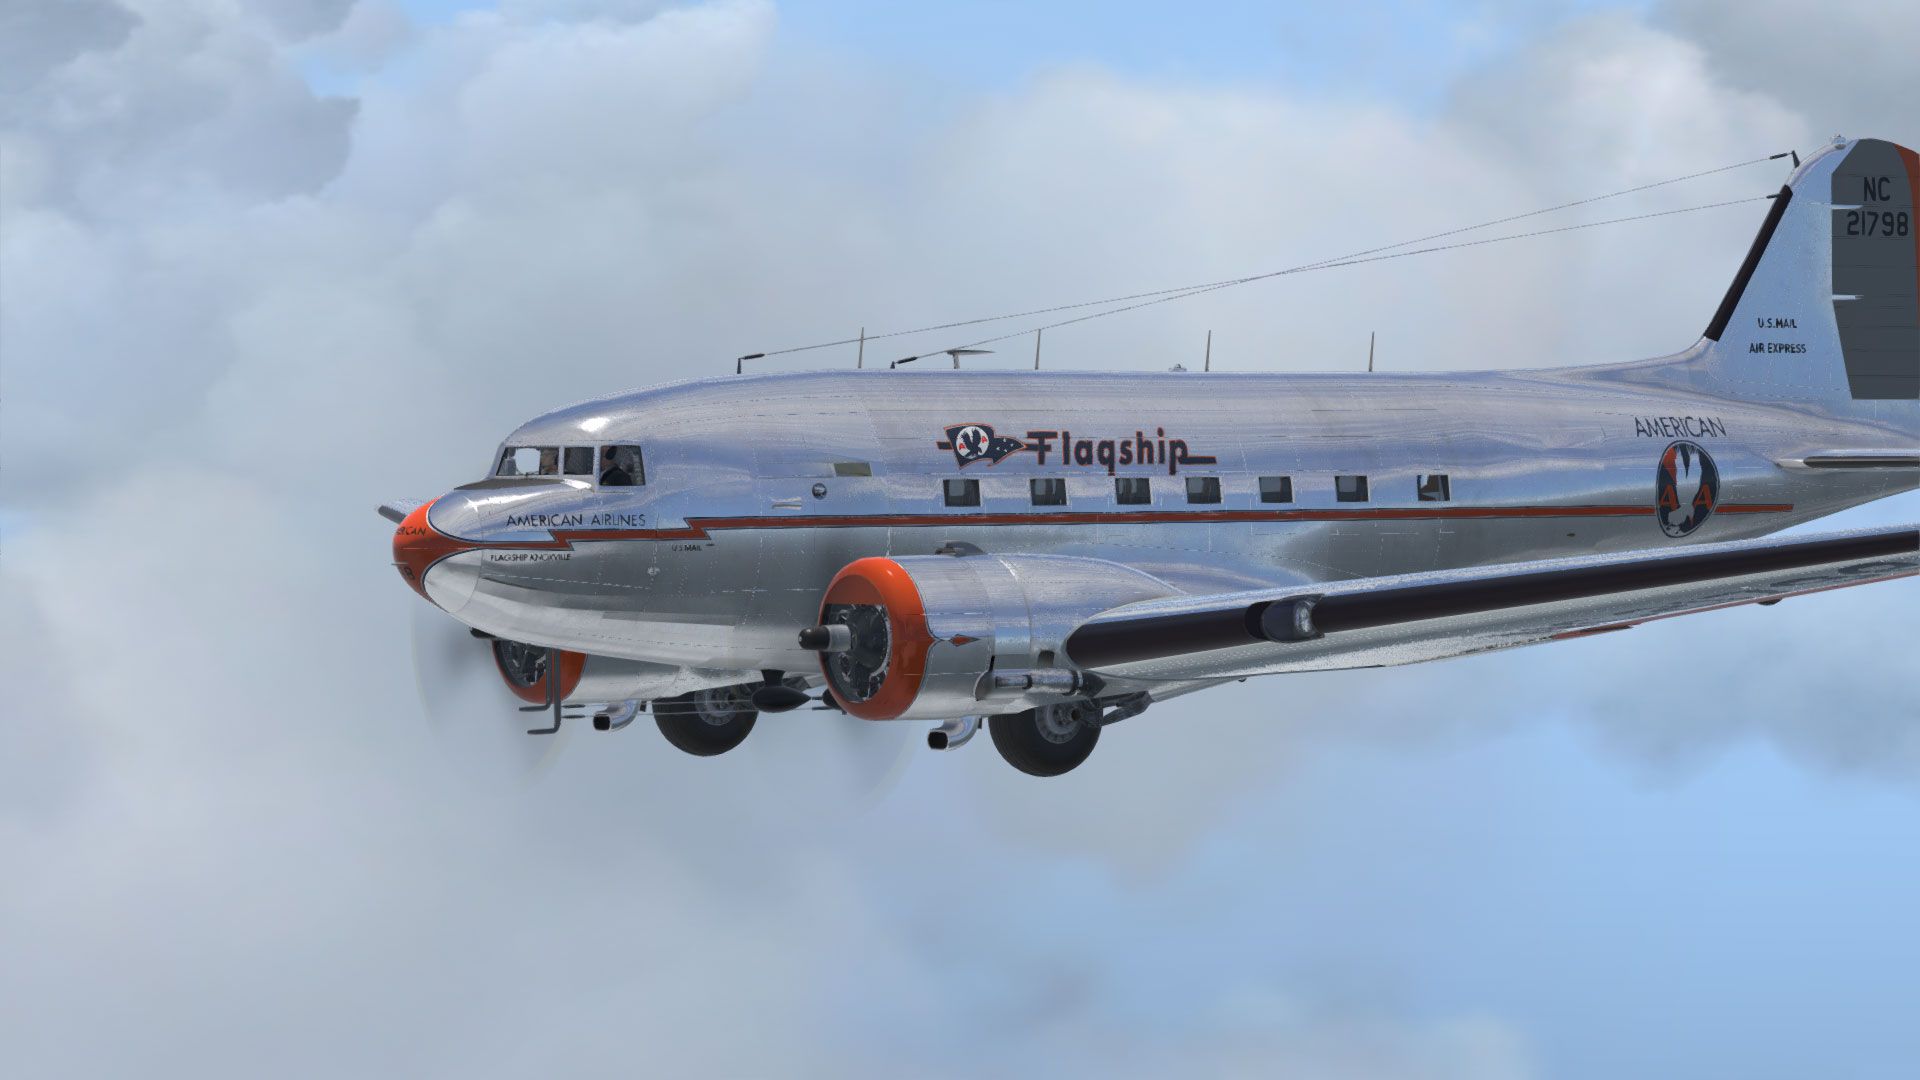 Aeroplane Heaven Has Released The DC 3 And C 47 • DigitalFlight Wire